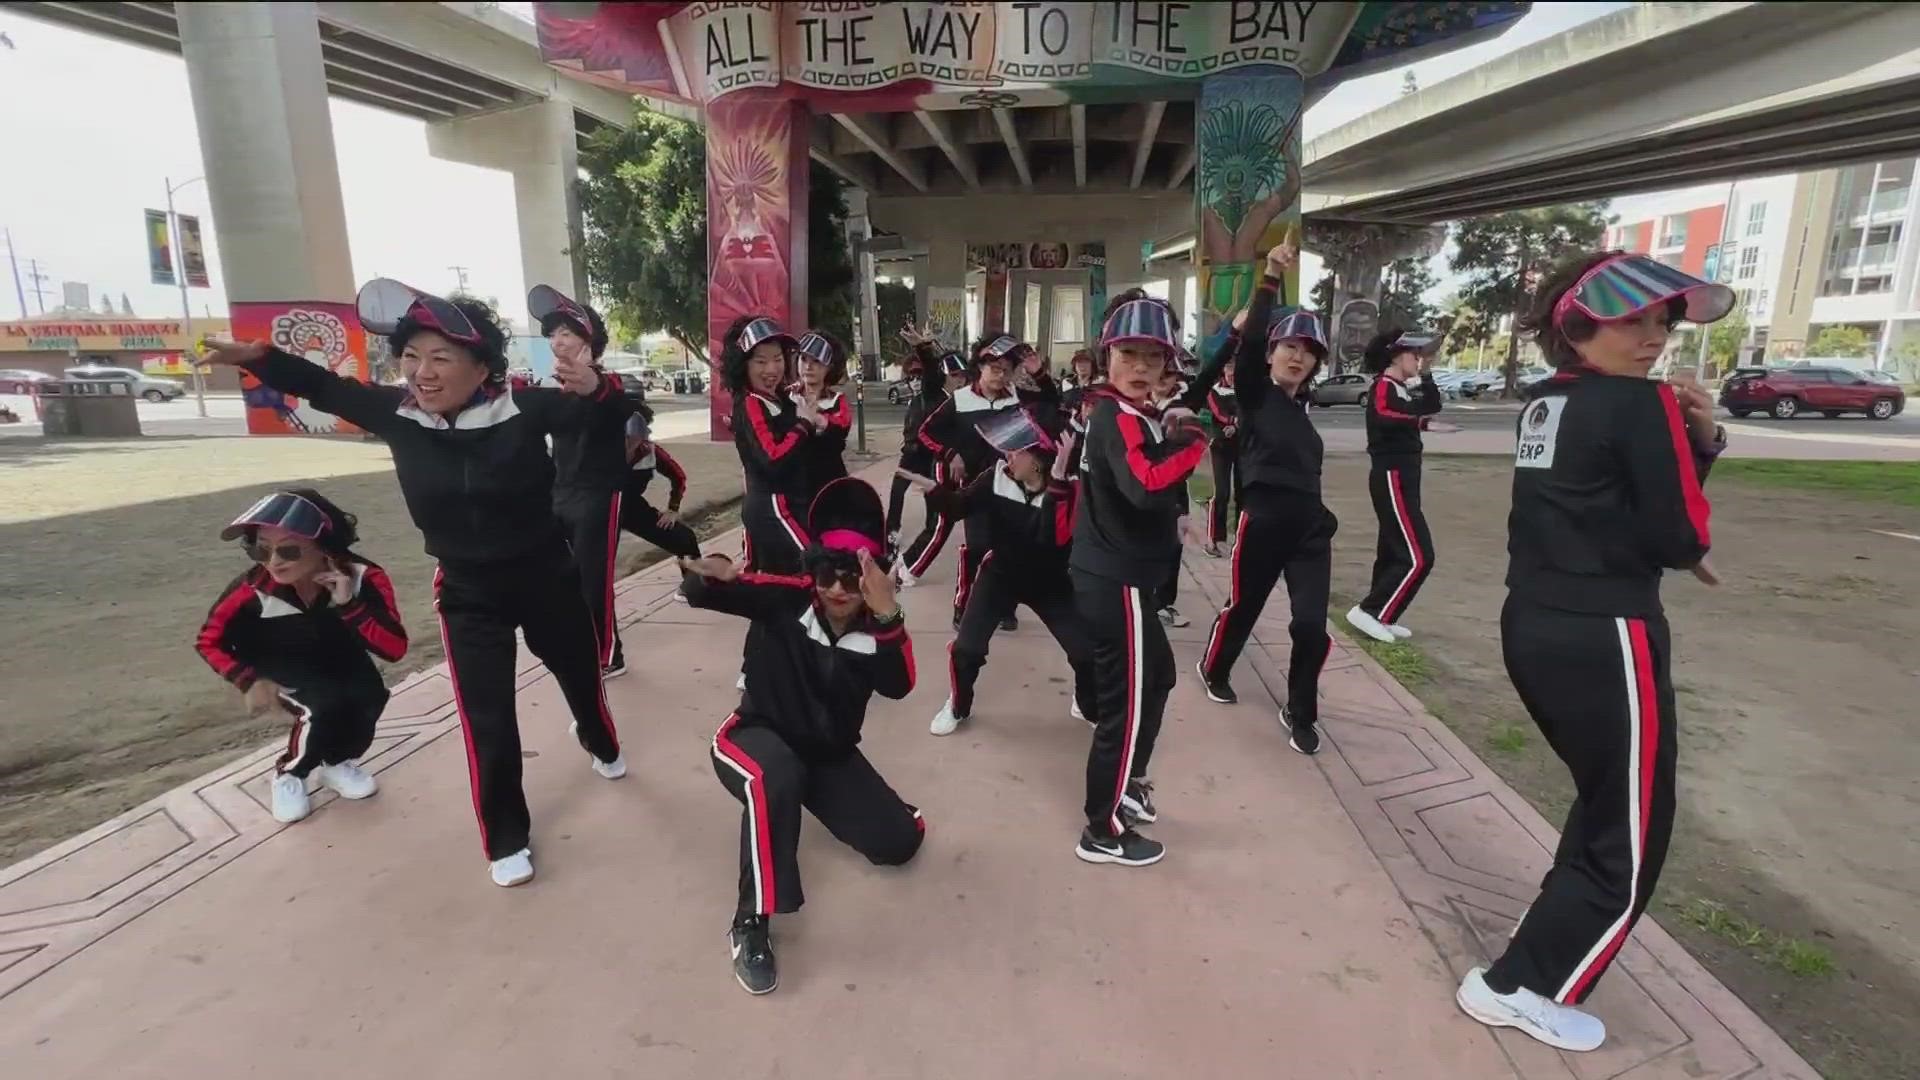 More than 30 San Diego women known as Ajumma EXP hit the streets of San Diego Sunday with three surprise flash mobs to celebrate Women’s History Month.